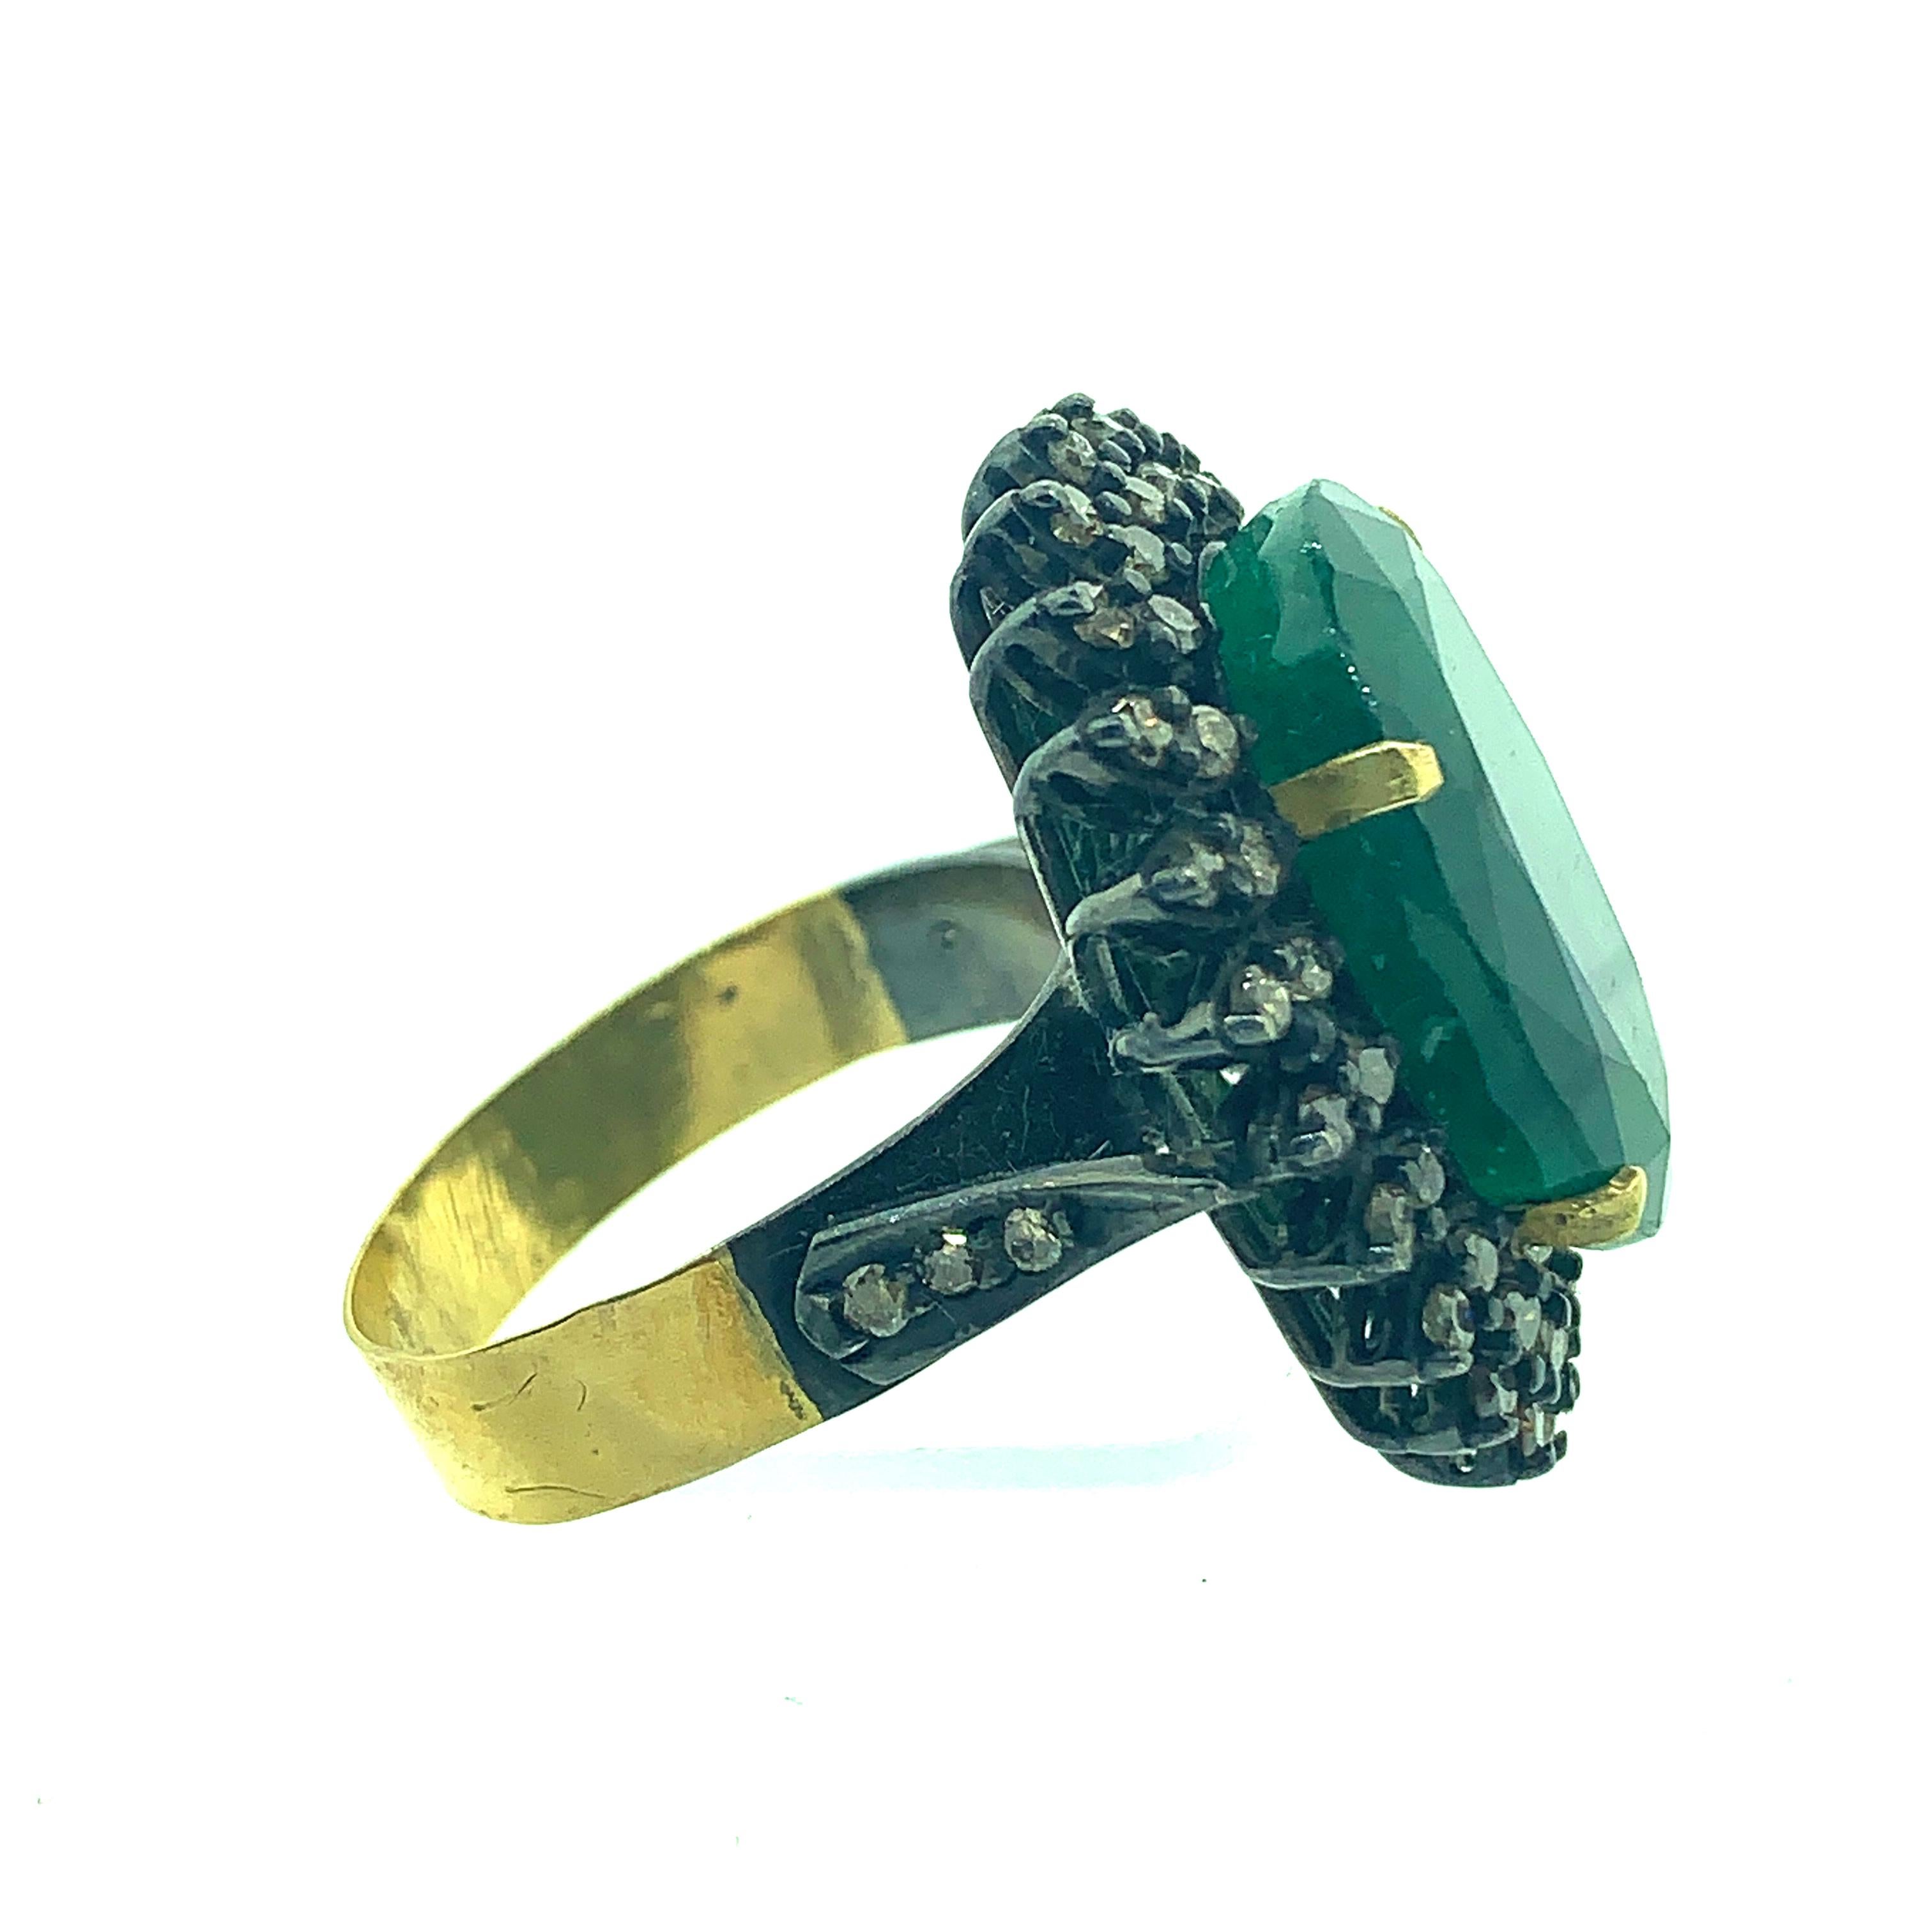 13.50 ct Emerald surrounded by 0.64 ct Champagne Diamond Ring set in Oxidized Sterling Silver with half shank and prongs in 18K Gold. The stones are all natural and real. The ring shank is 7 and it can be sized. 
Stones - Emerald : 13.50ct
         